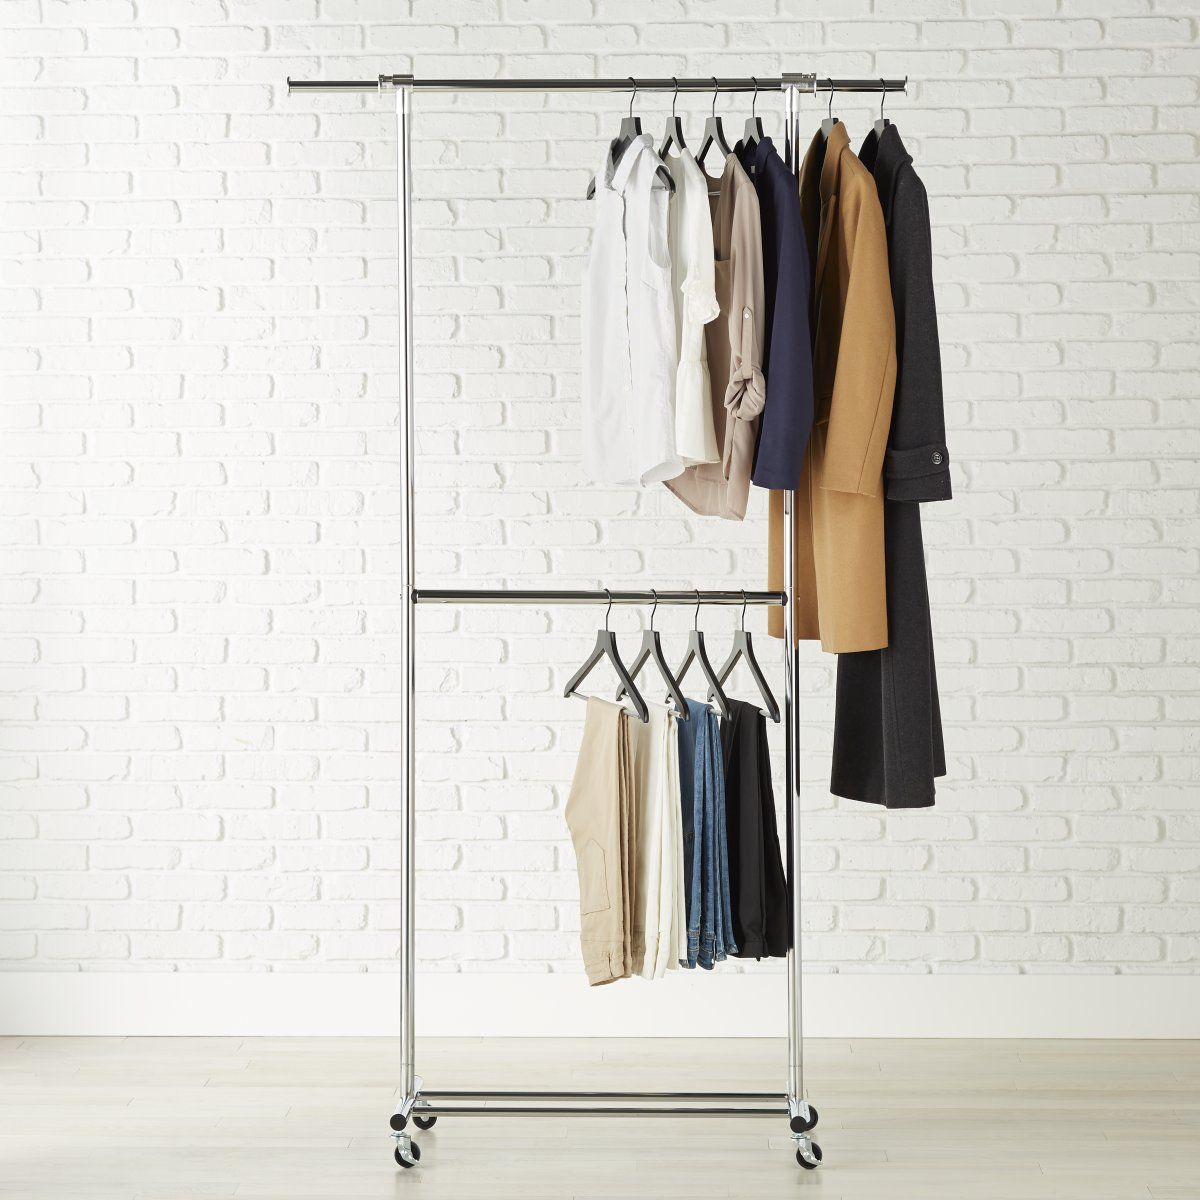 Double Hang Chrome Garment Rack | The Container Store With Double Clothes Rail Wardrobes (View 10 of 15)